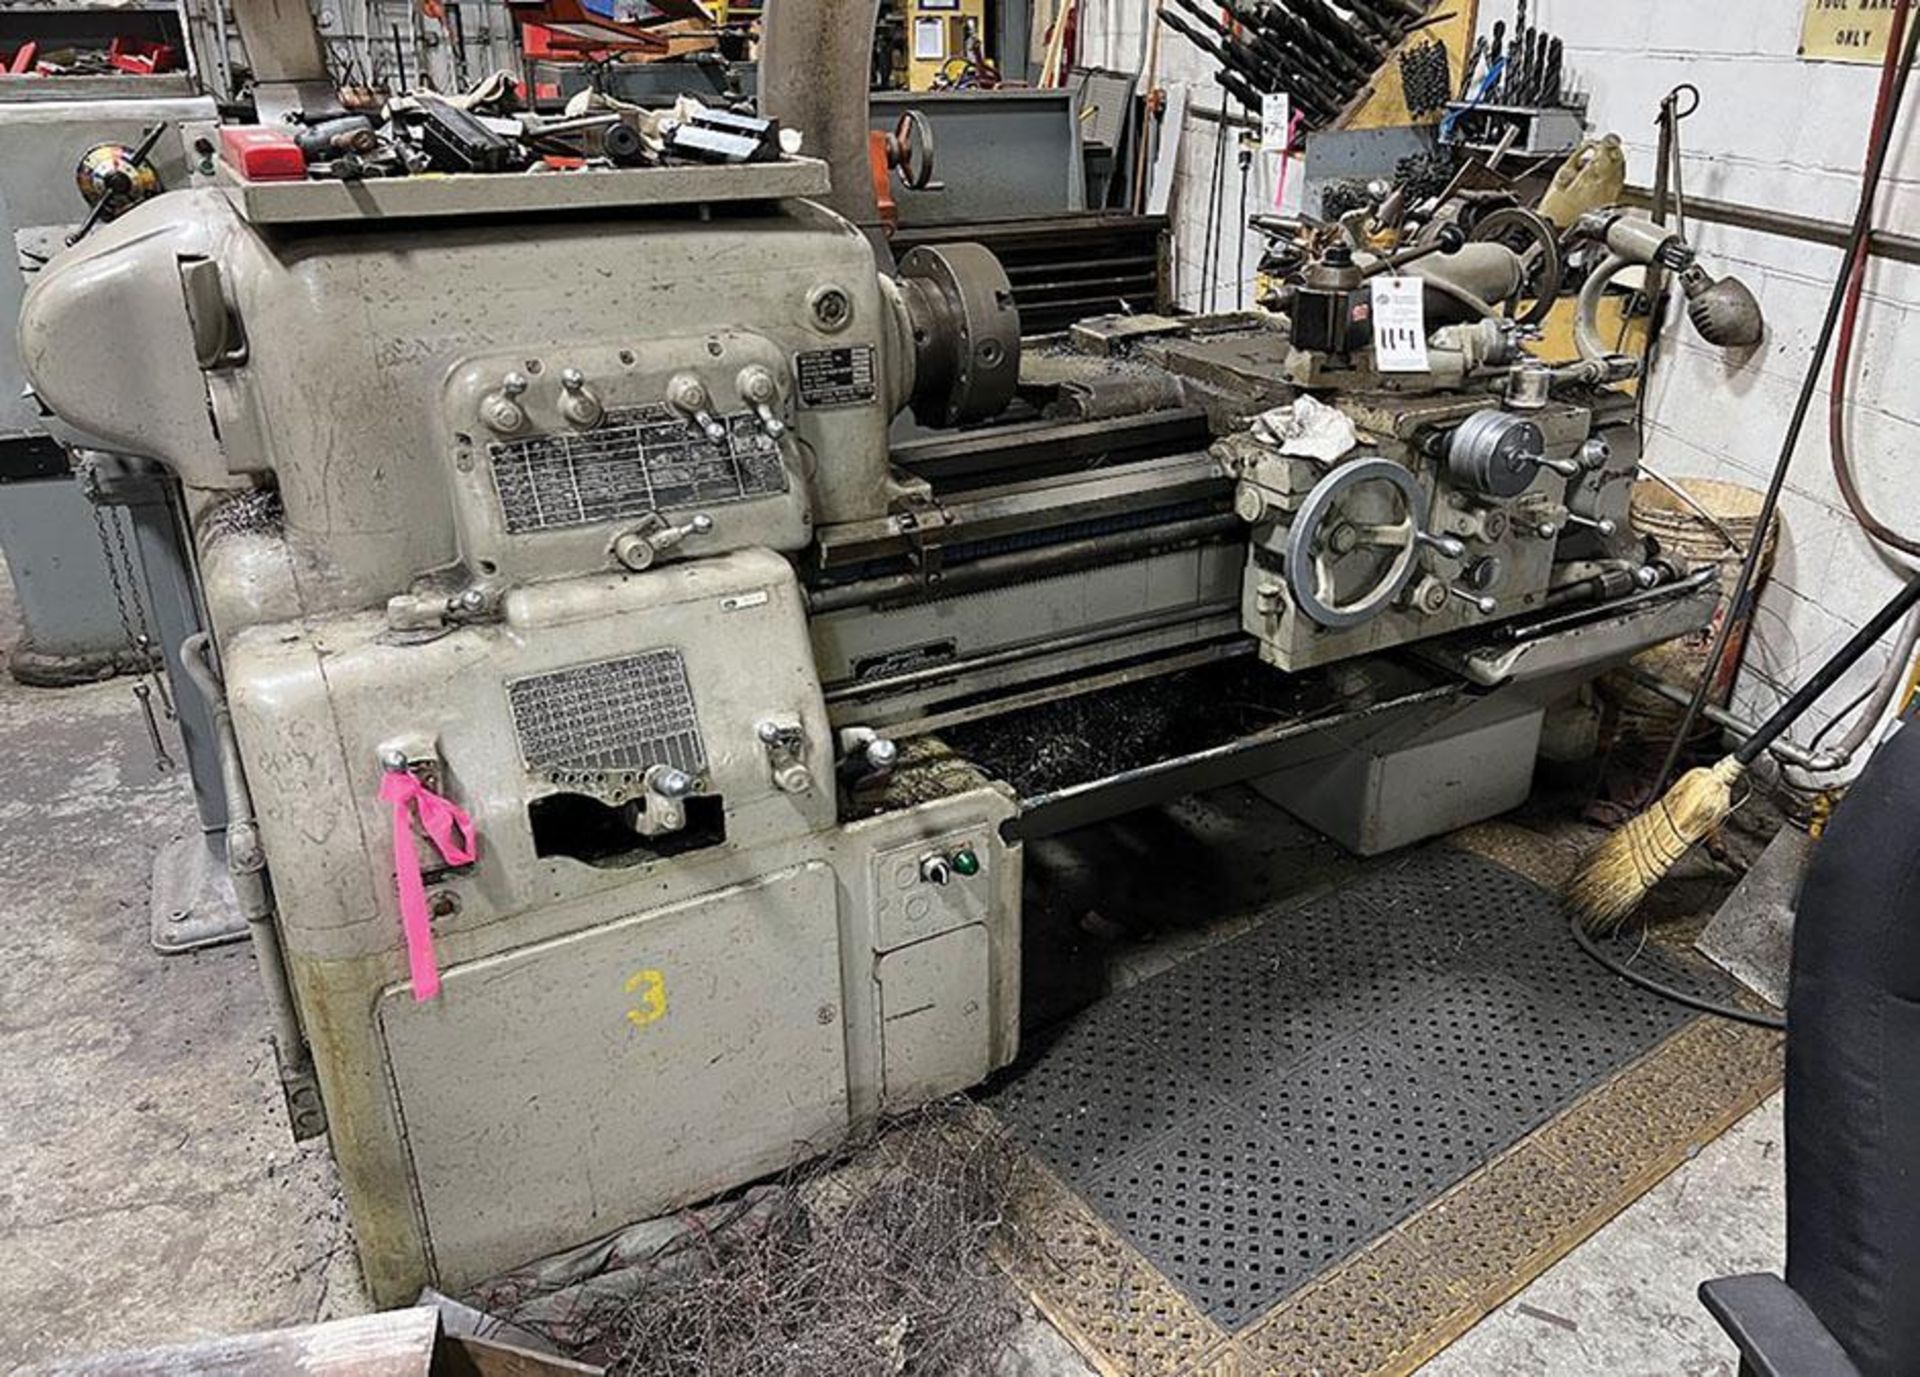 1950 Monarch 14'' x 30" Engine Lathe, Catalogue Size: 14'', Serial: 32826, Actual Swing: 16.5'', Dis